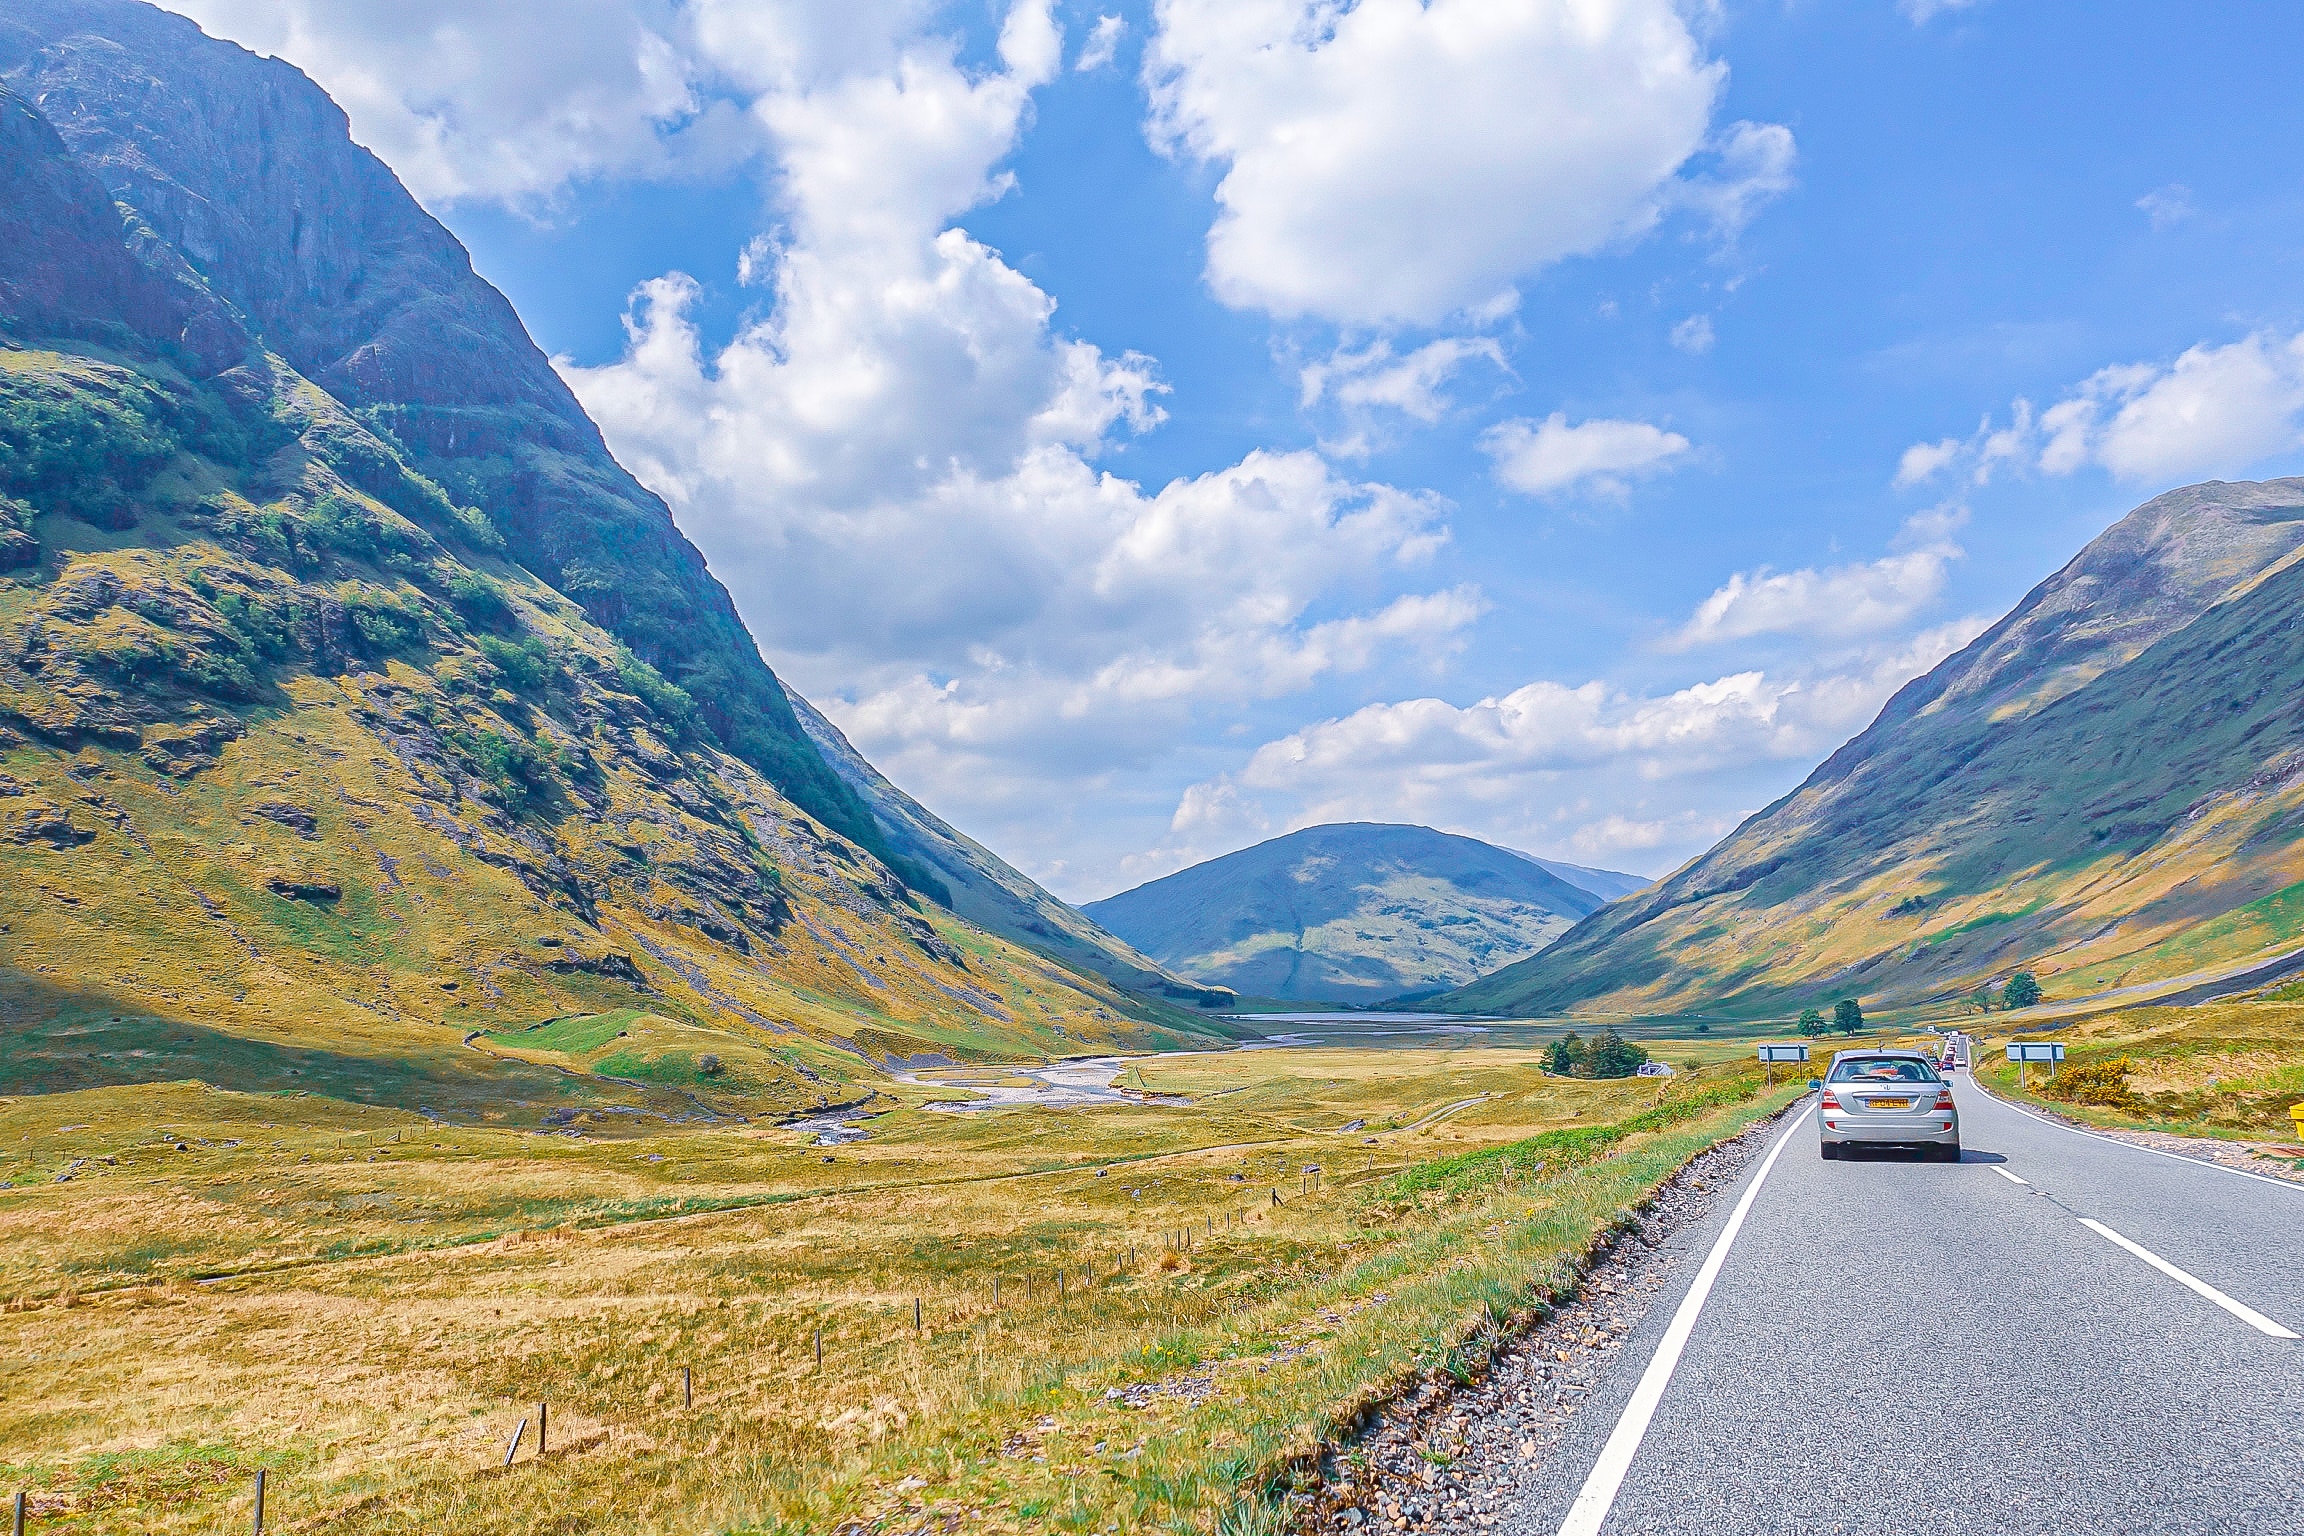 Road Trip in the Scottish Highlands